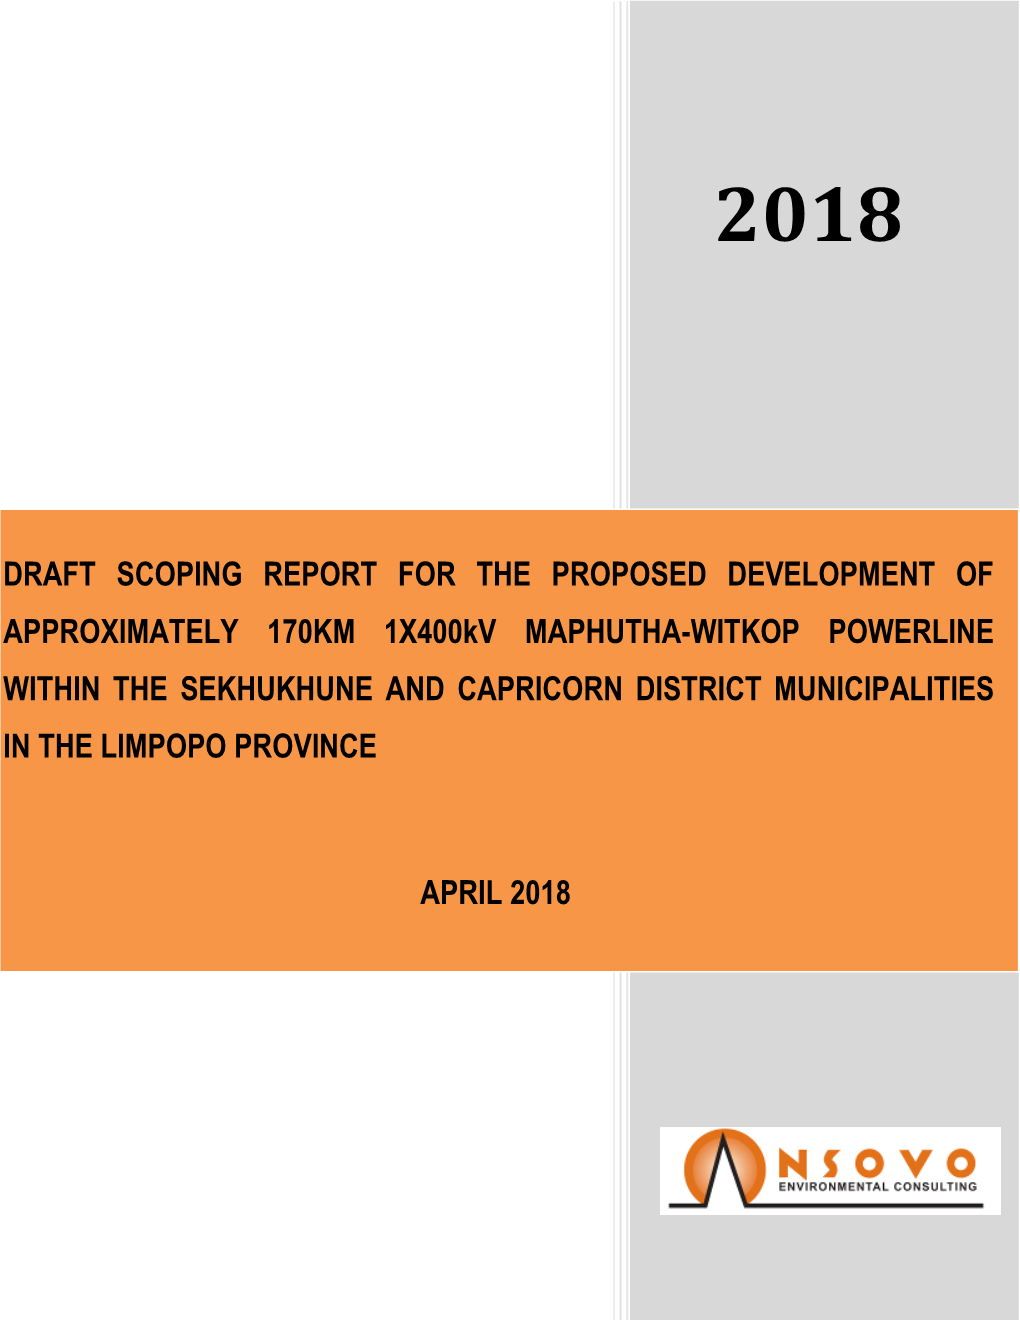 Draft Scoping Report for Maphutha Witkop